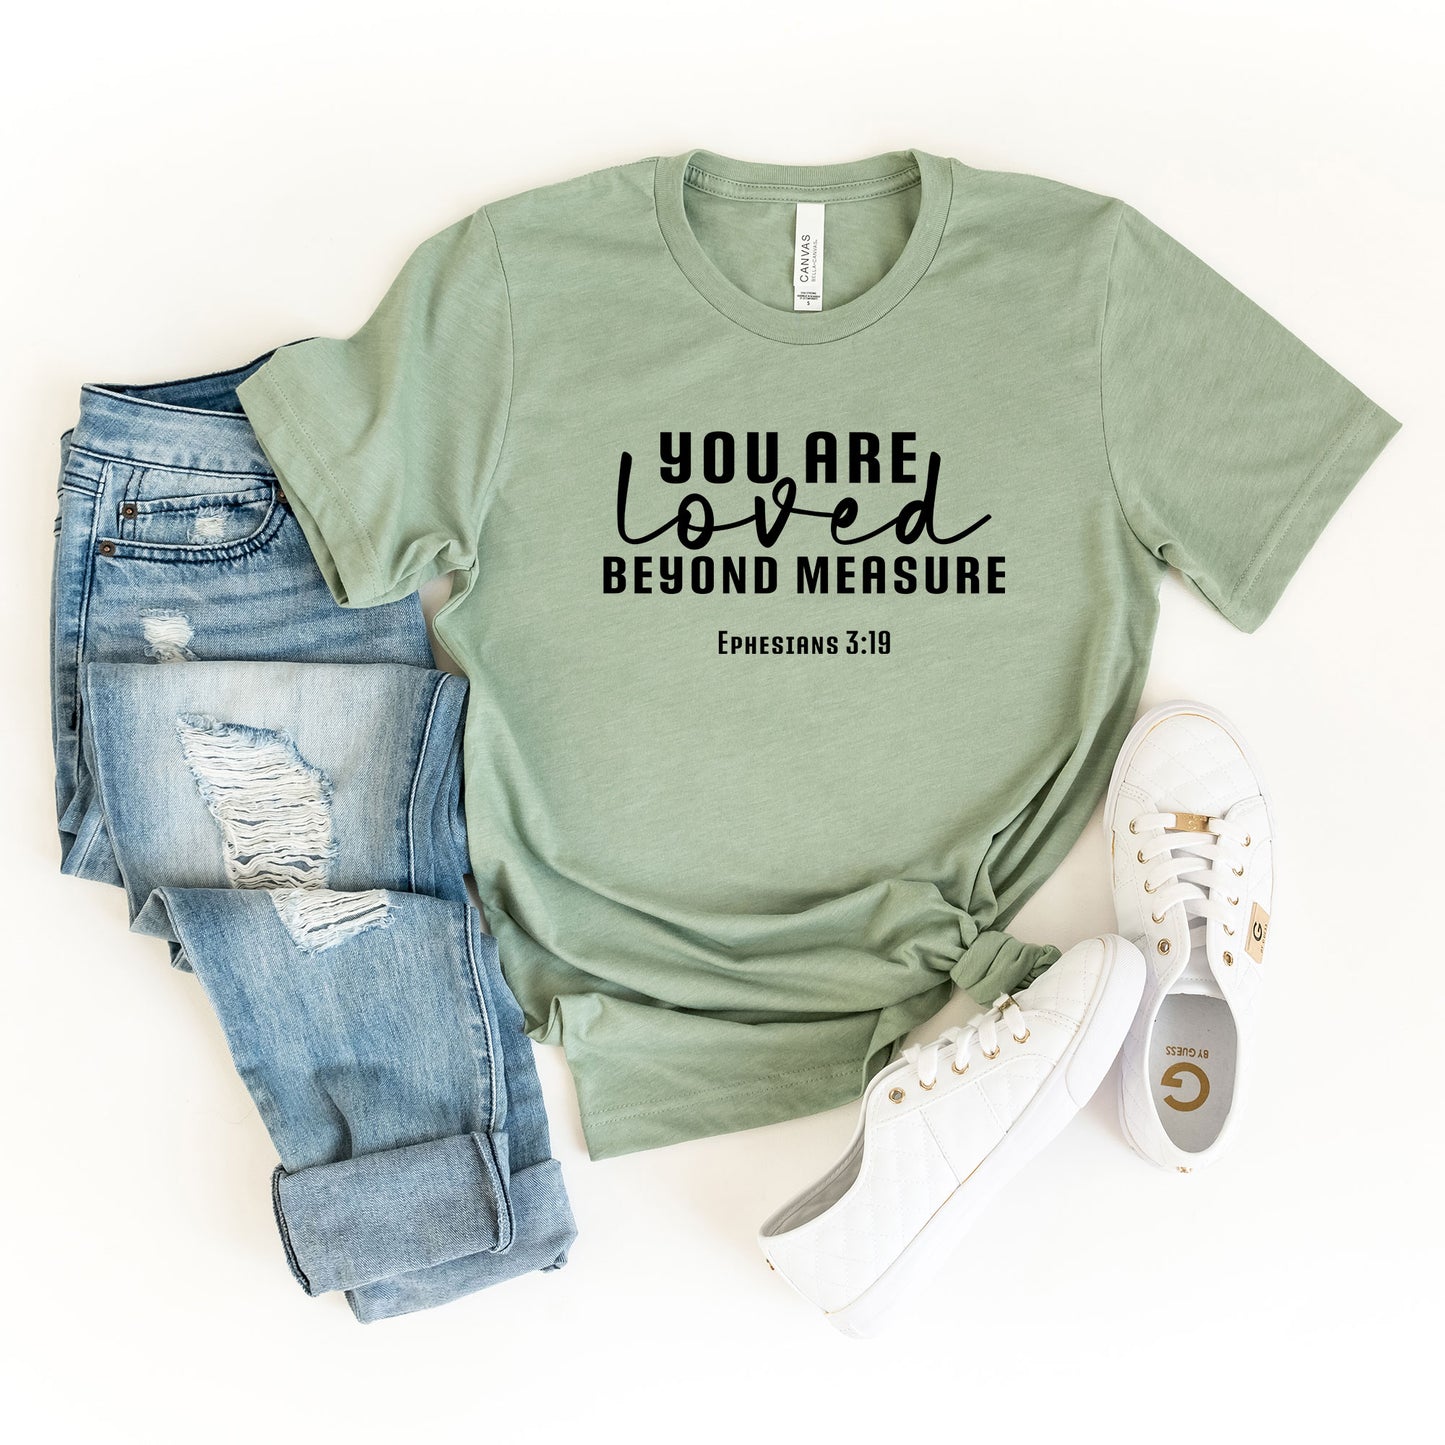 You Are Loved Beyond Measure | Short Sleeve Crew Neck